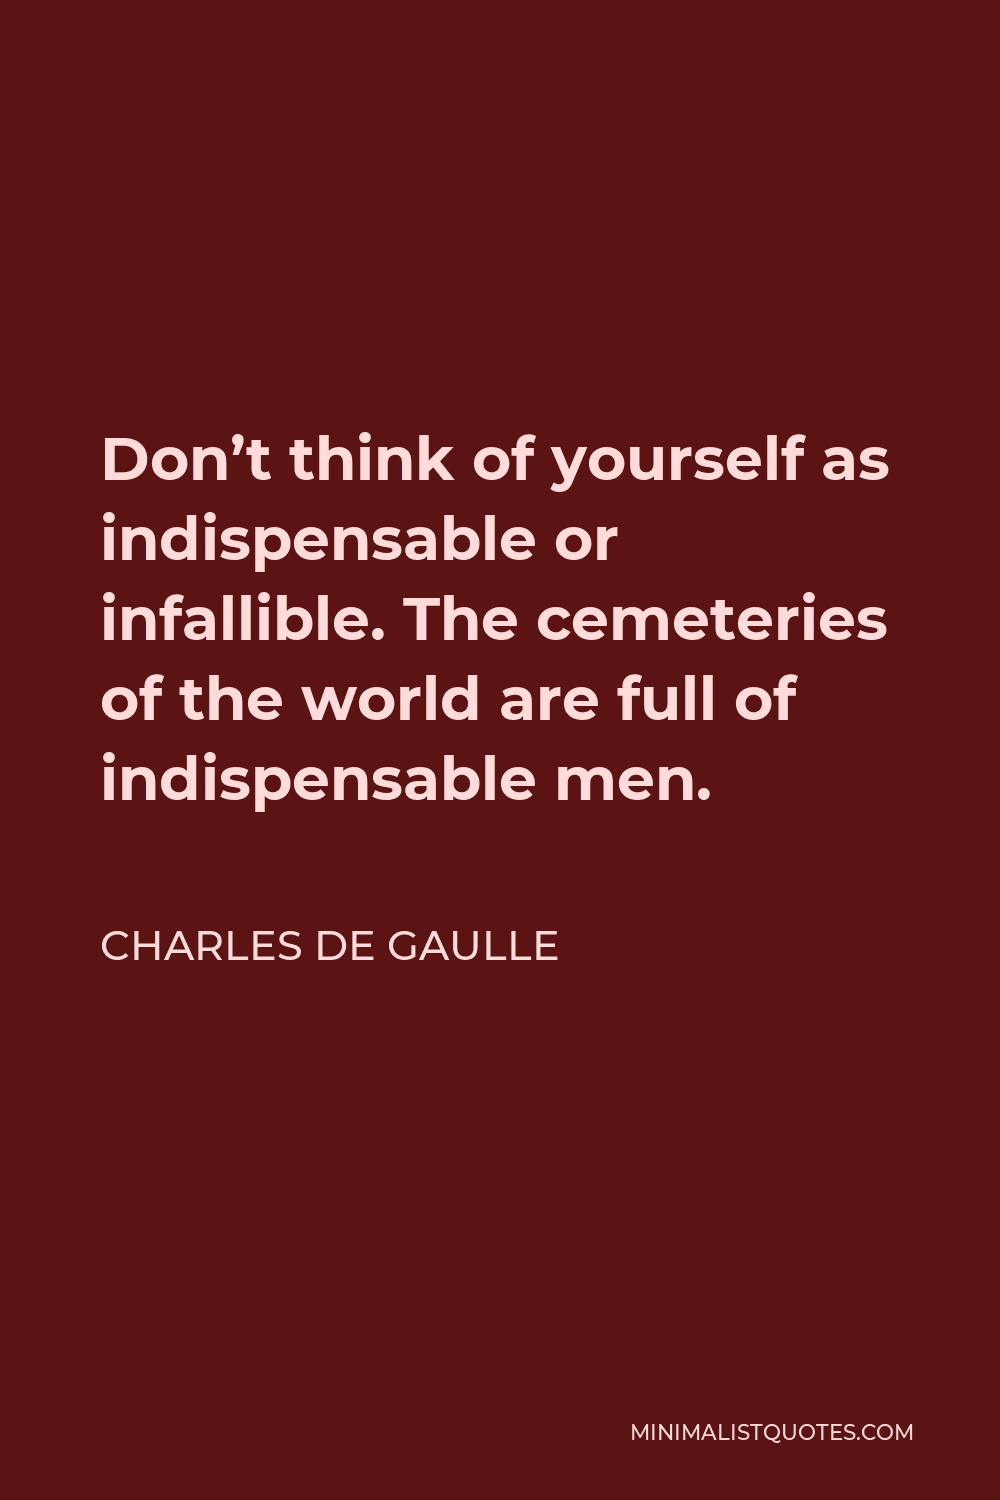 Charles de Gaulle Quote - Don’t think of yourself as indispensable or infallible. The cemeteries of the world are full of indispensable men.